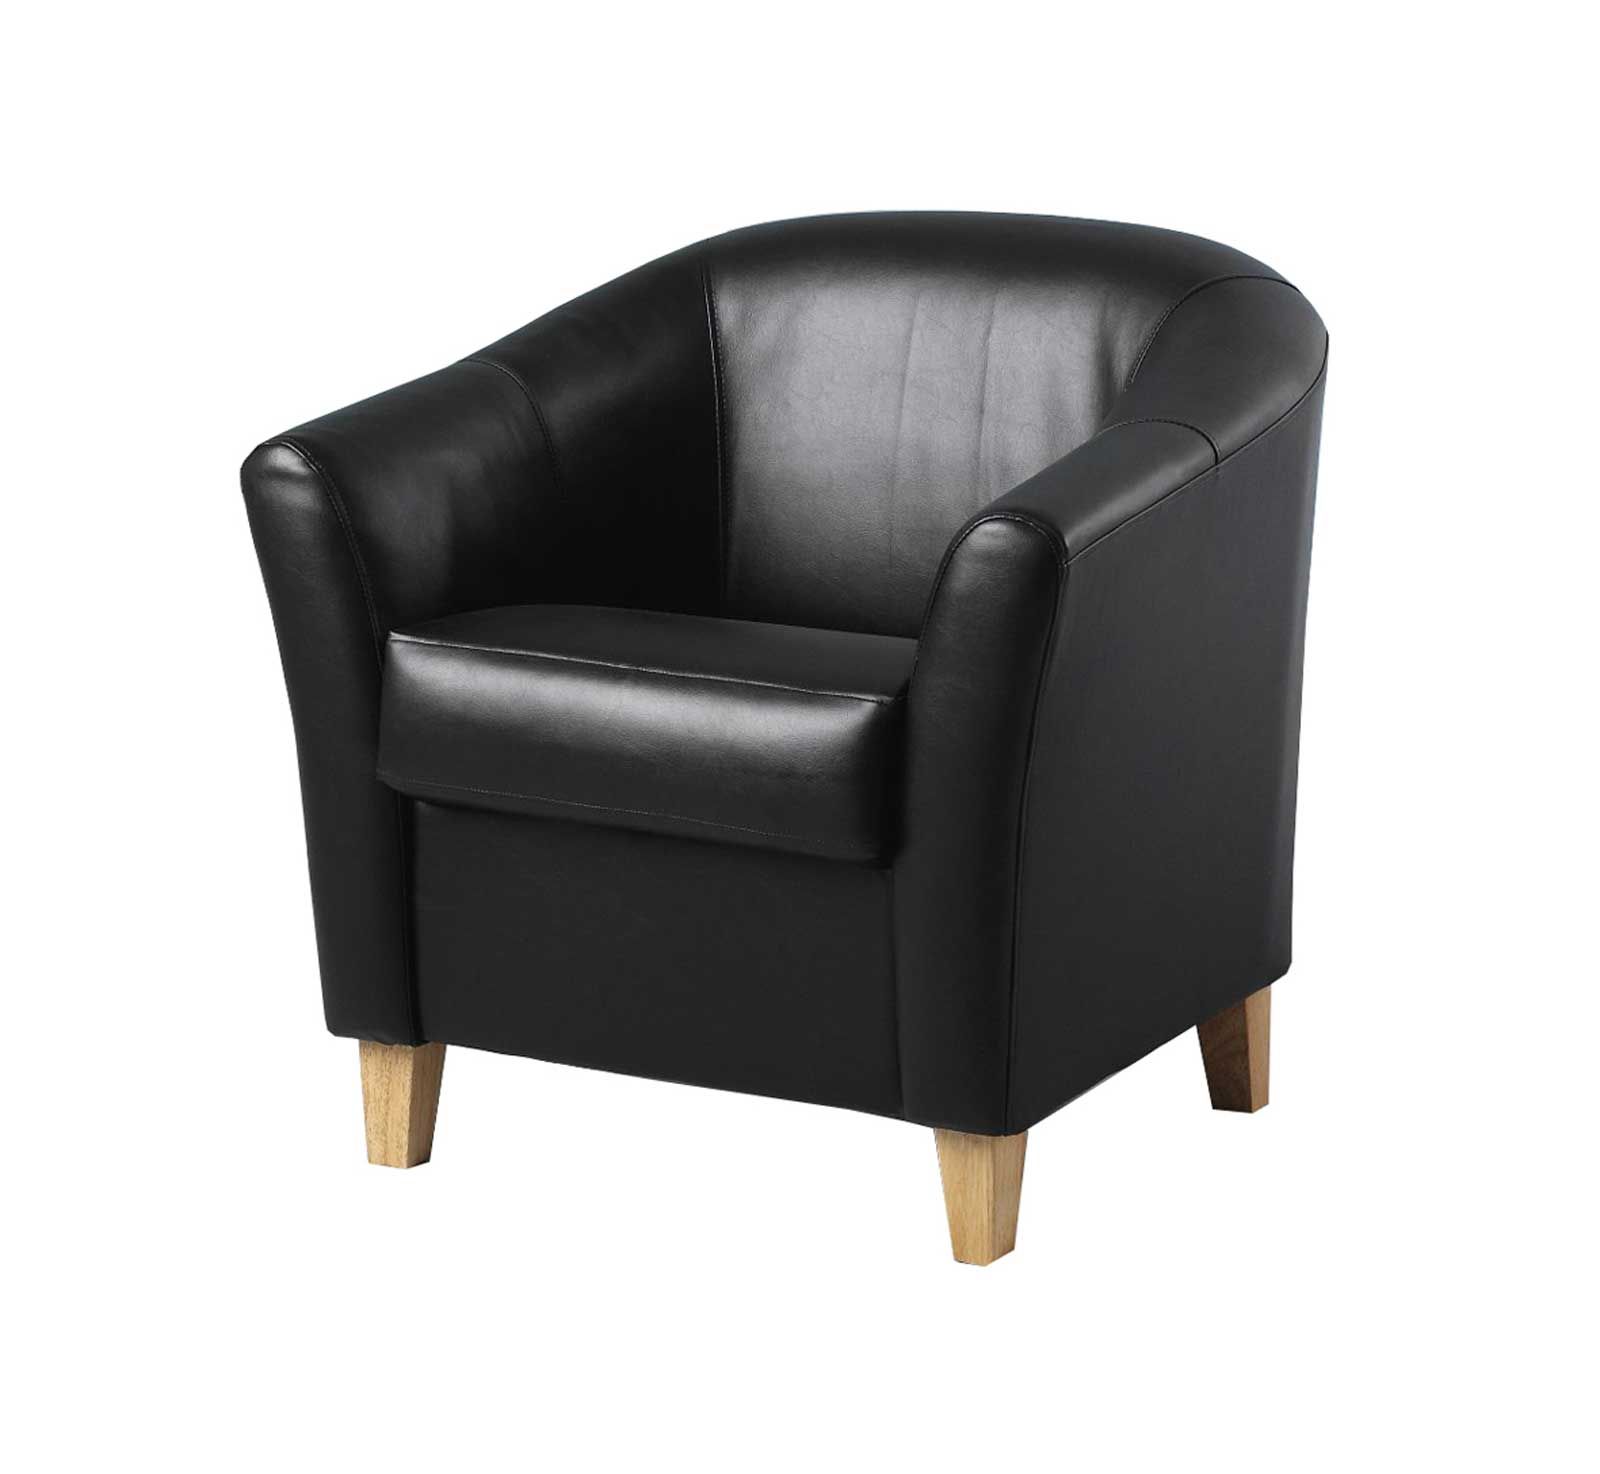 Faux Leather Tub Chair Pertaining To Faux Leather Barrel Chairs (View 12 of 15)